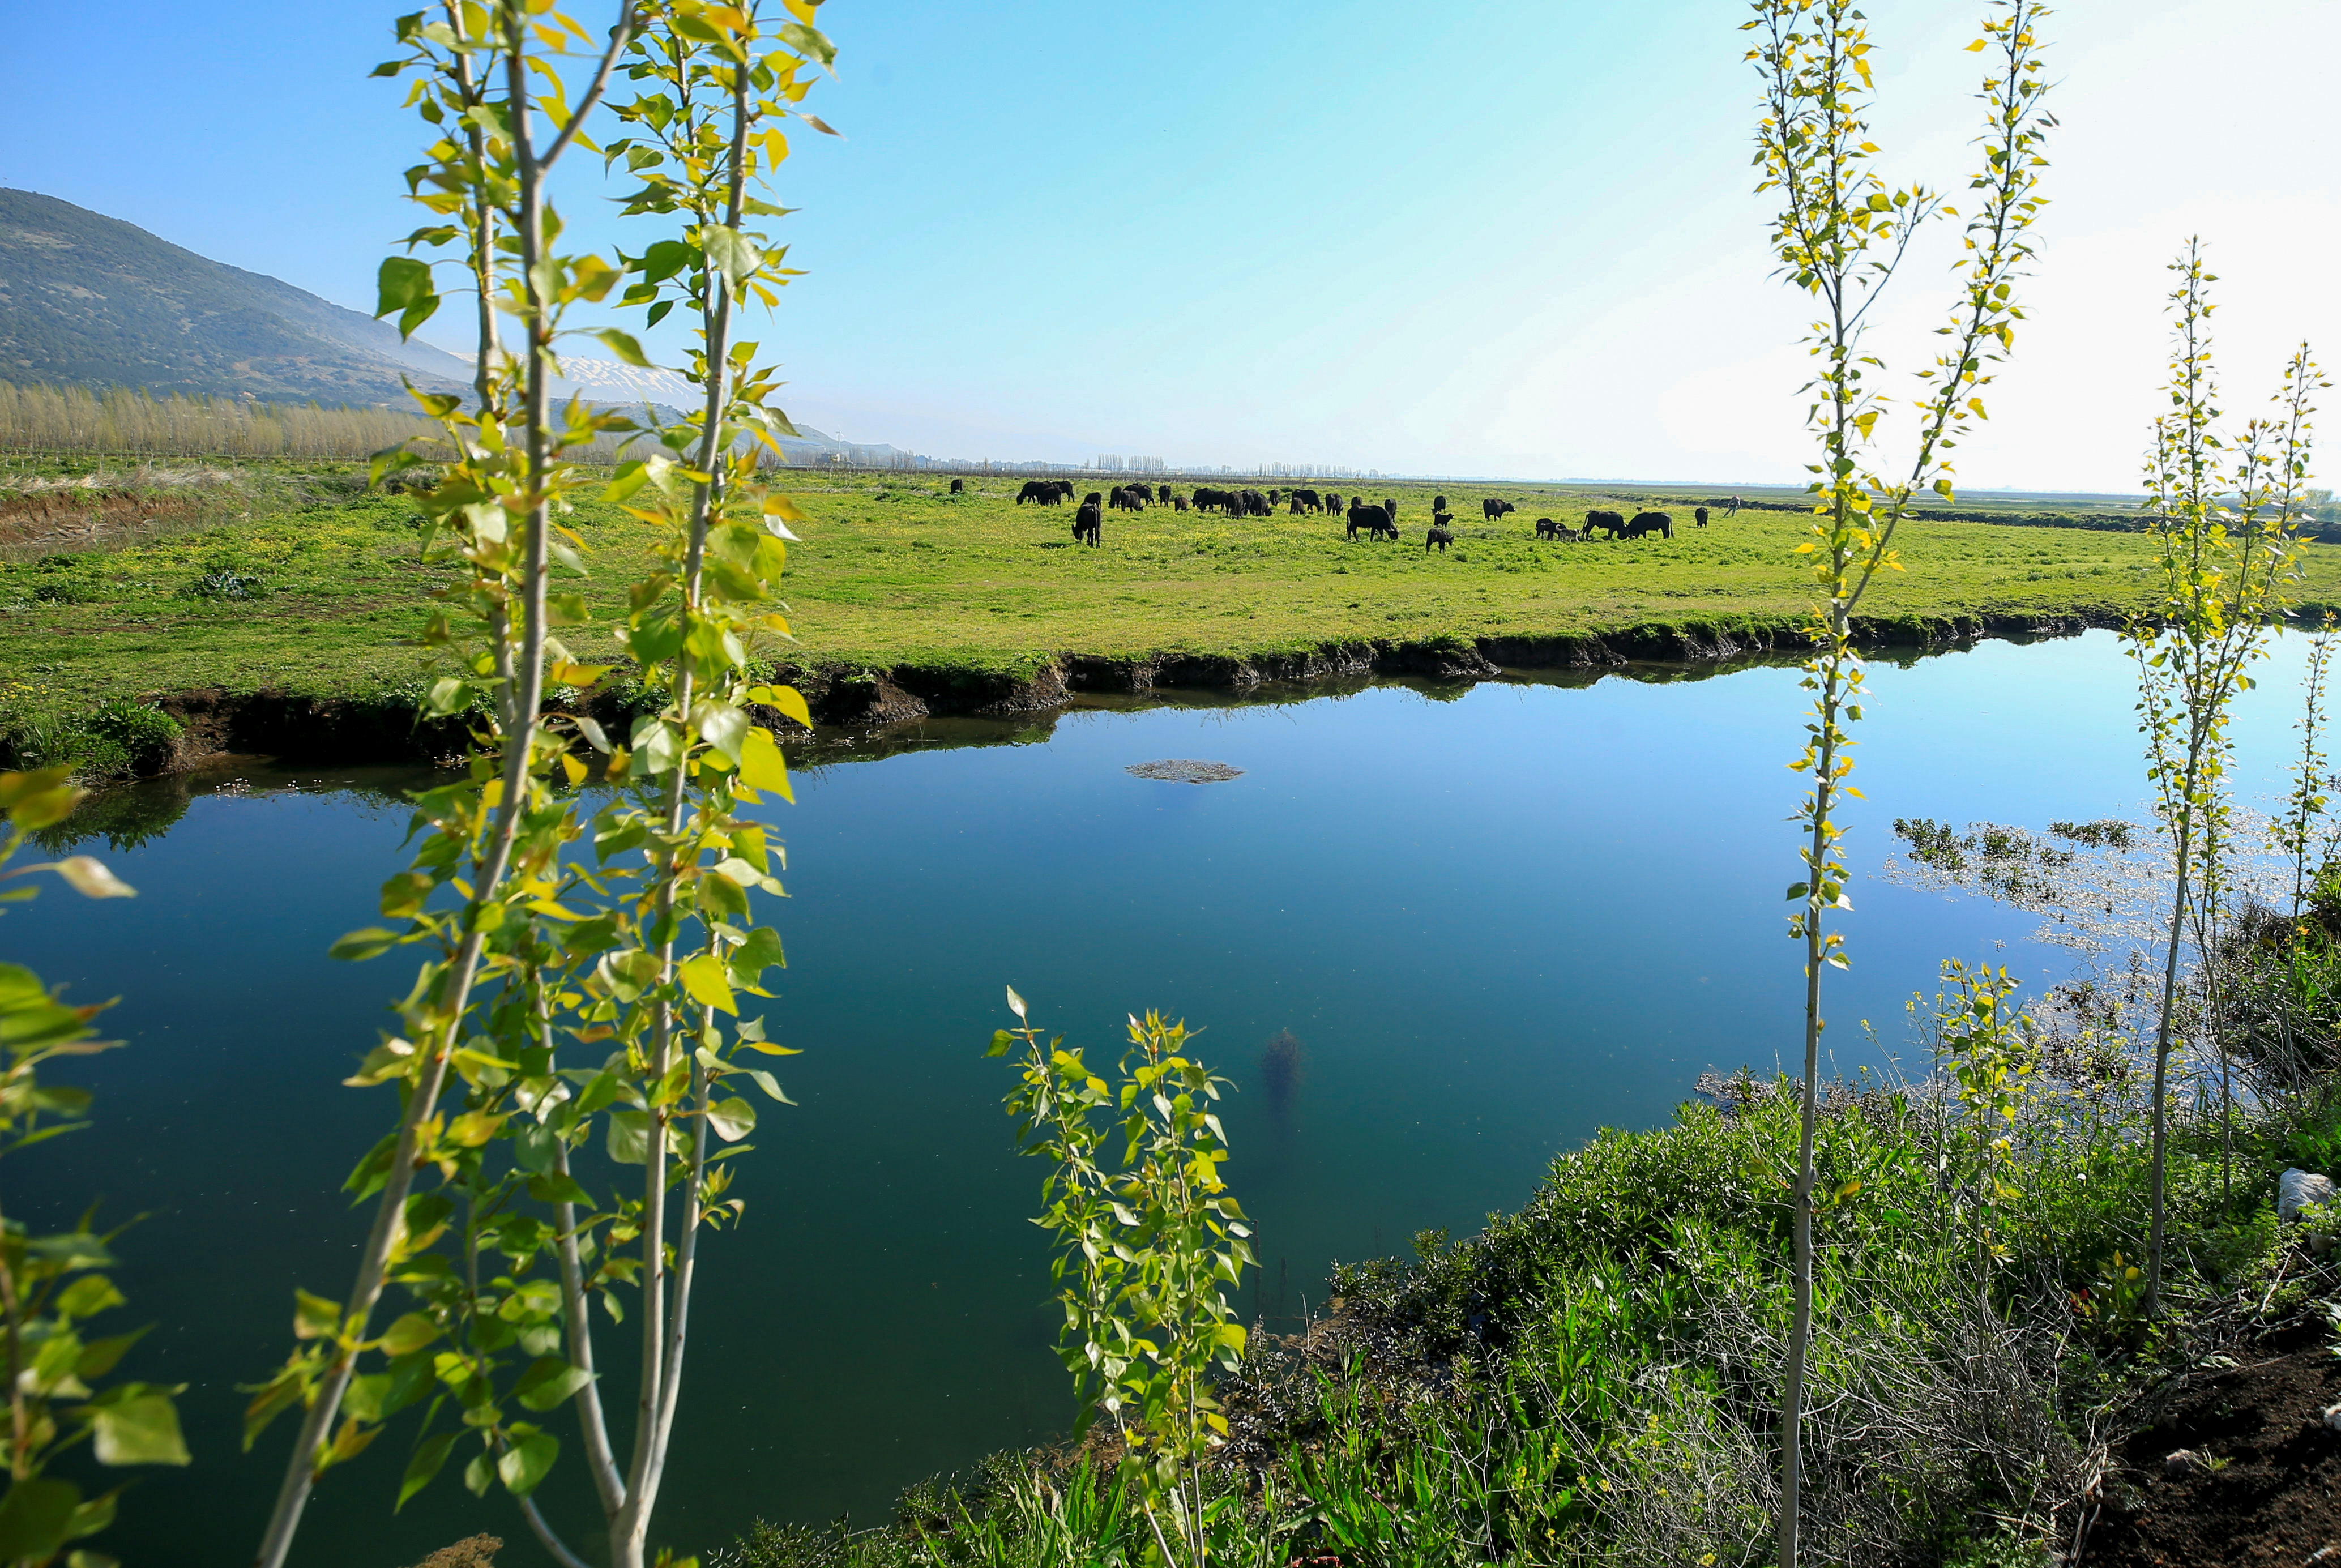 A view from Ammiq Wetland, in Lebanon's eastern Bekaa valley